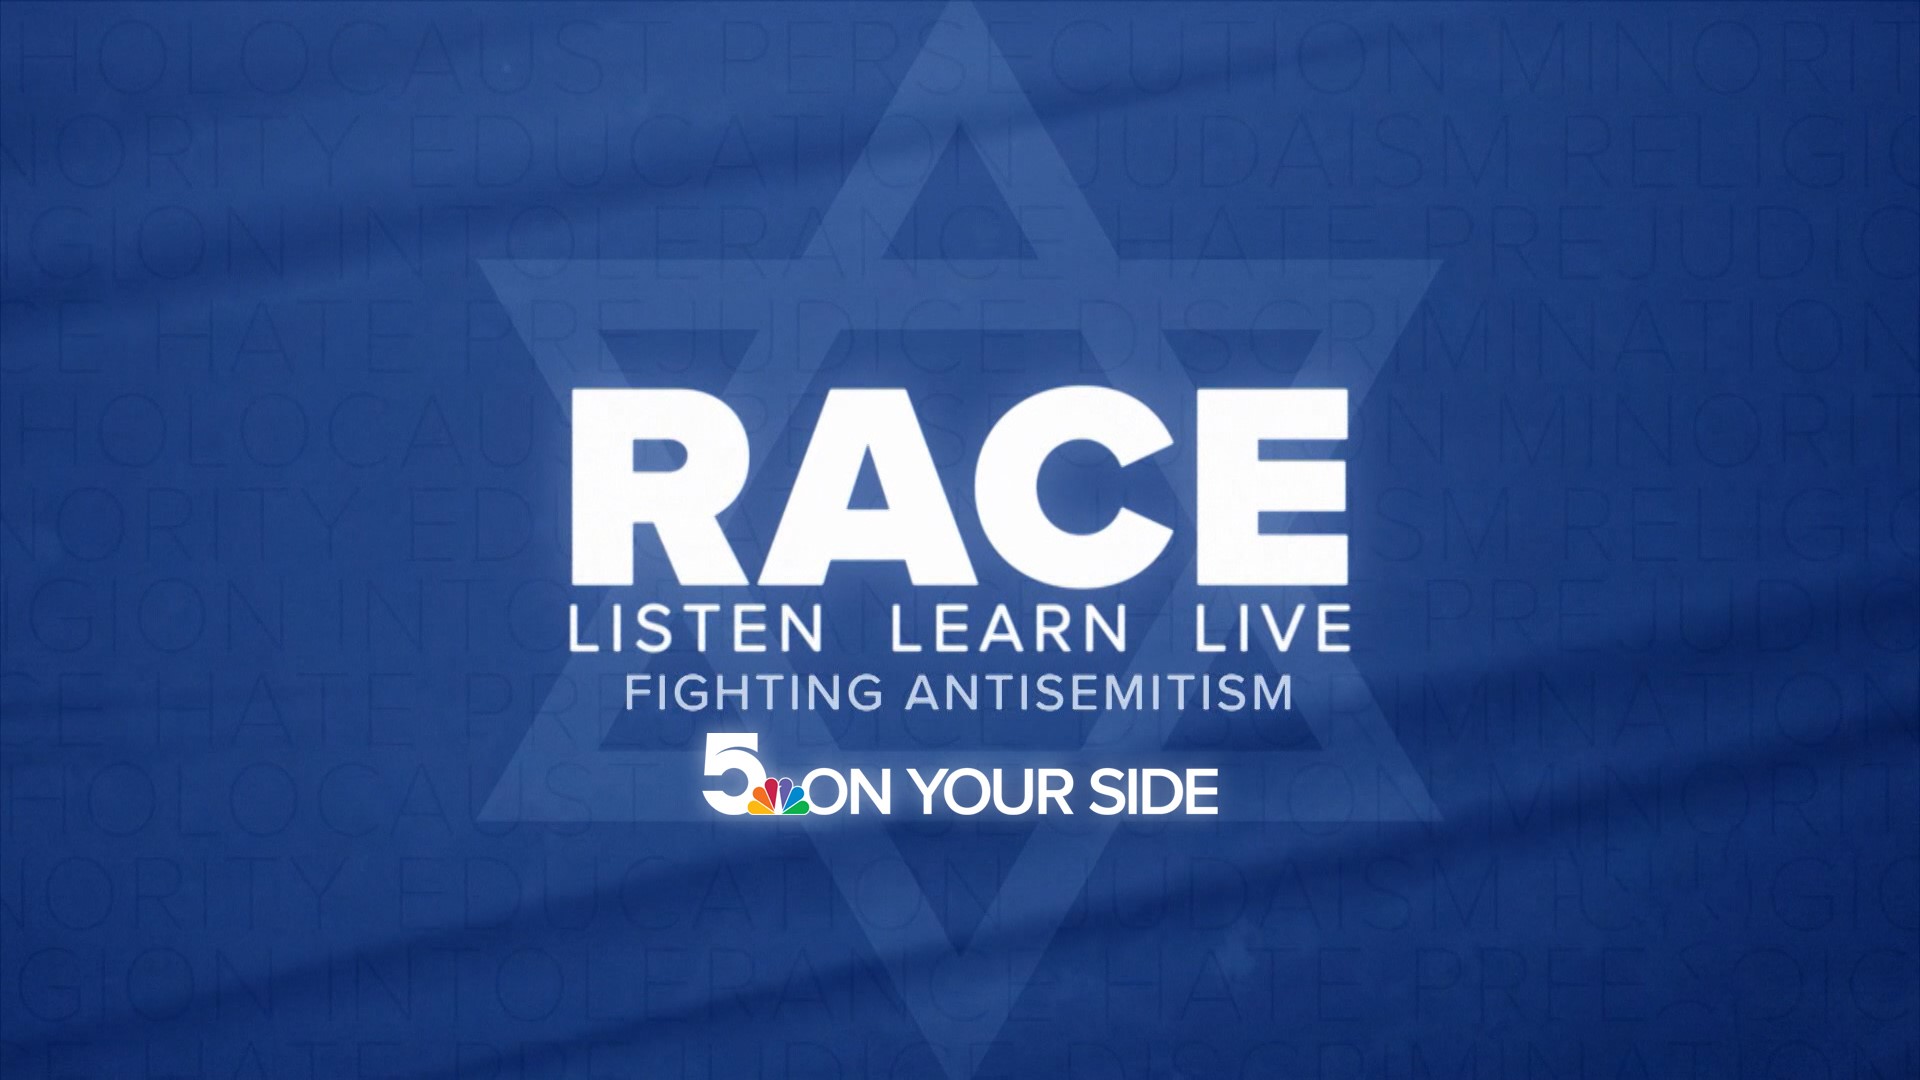 "RACE: Listen. Learn. Live. Fighting Antisemitism," sponsored by St. Louis Kaplan Feldman Holocaust Museum, tackles the rise of antisemitism.